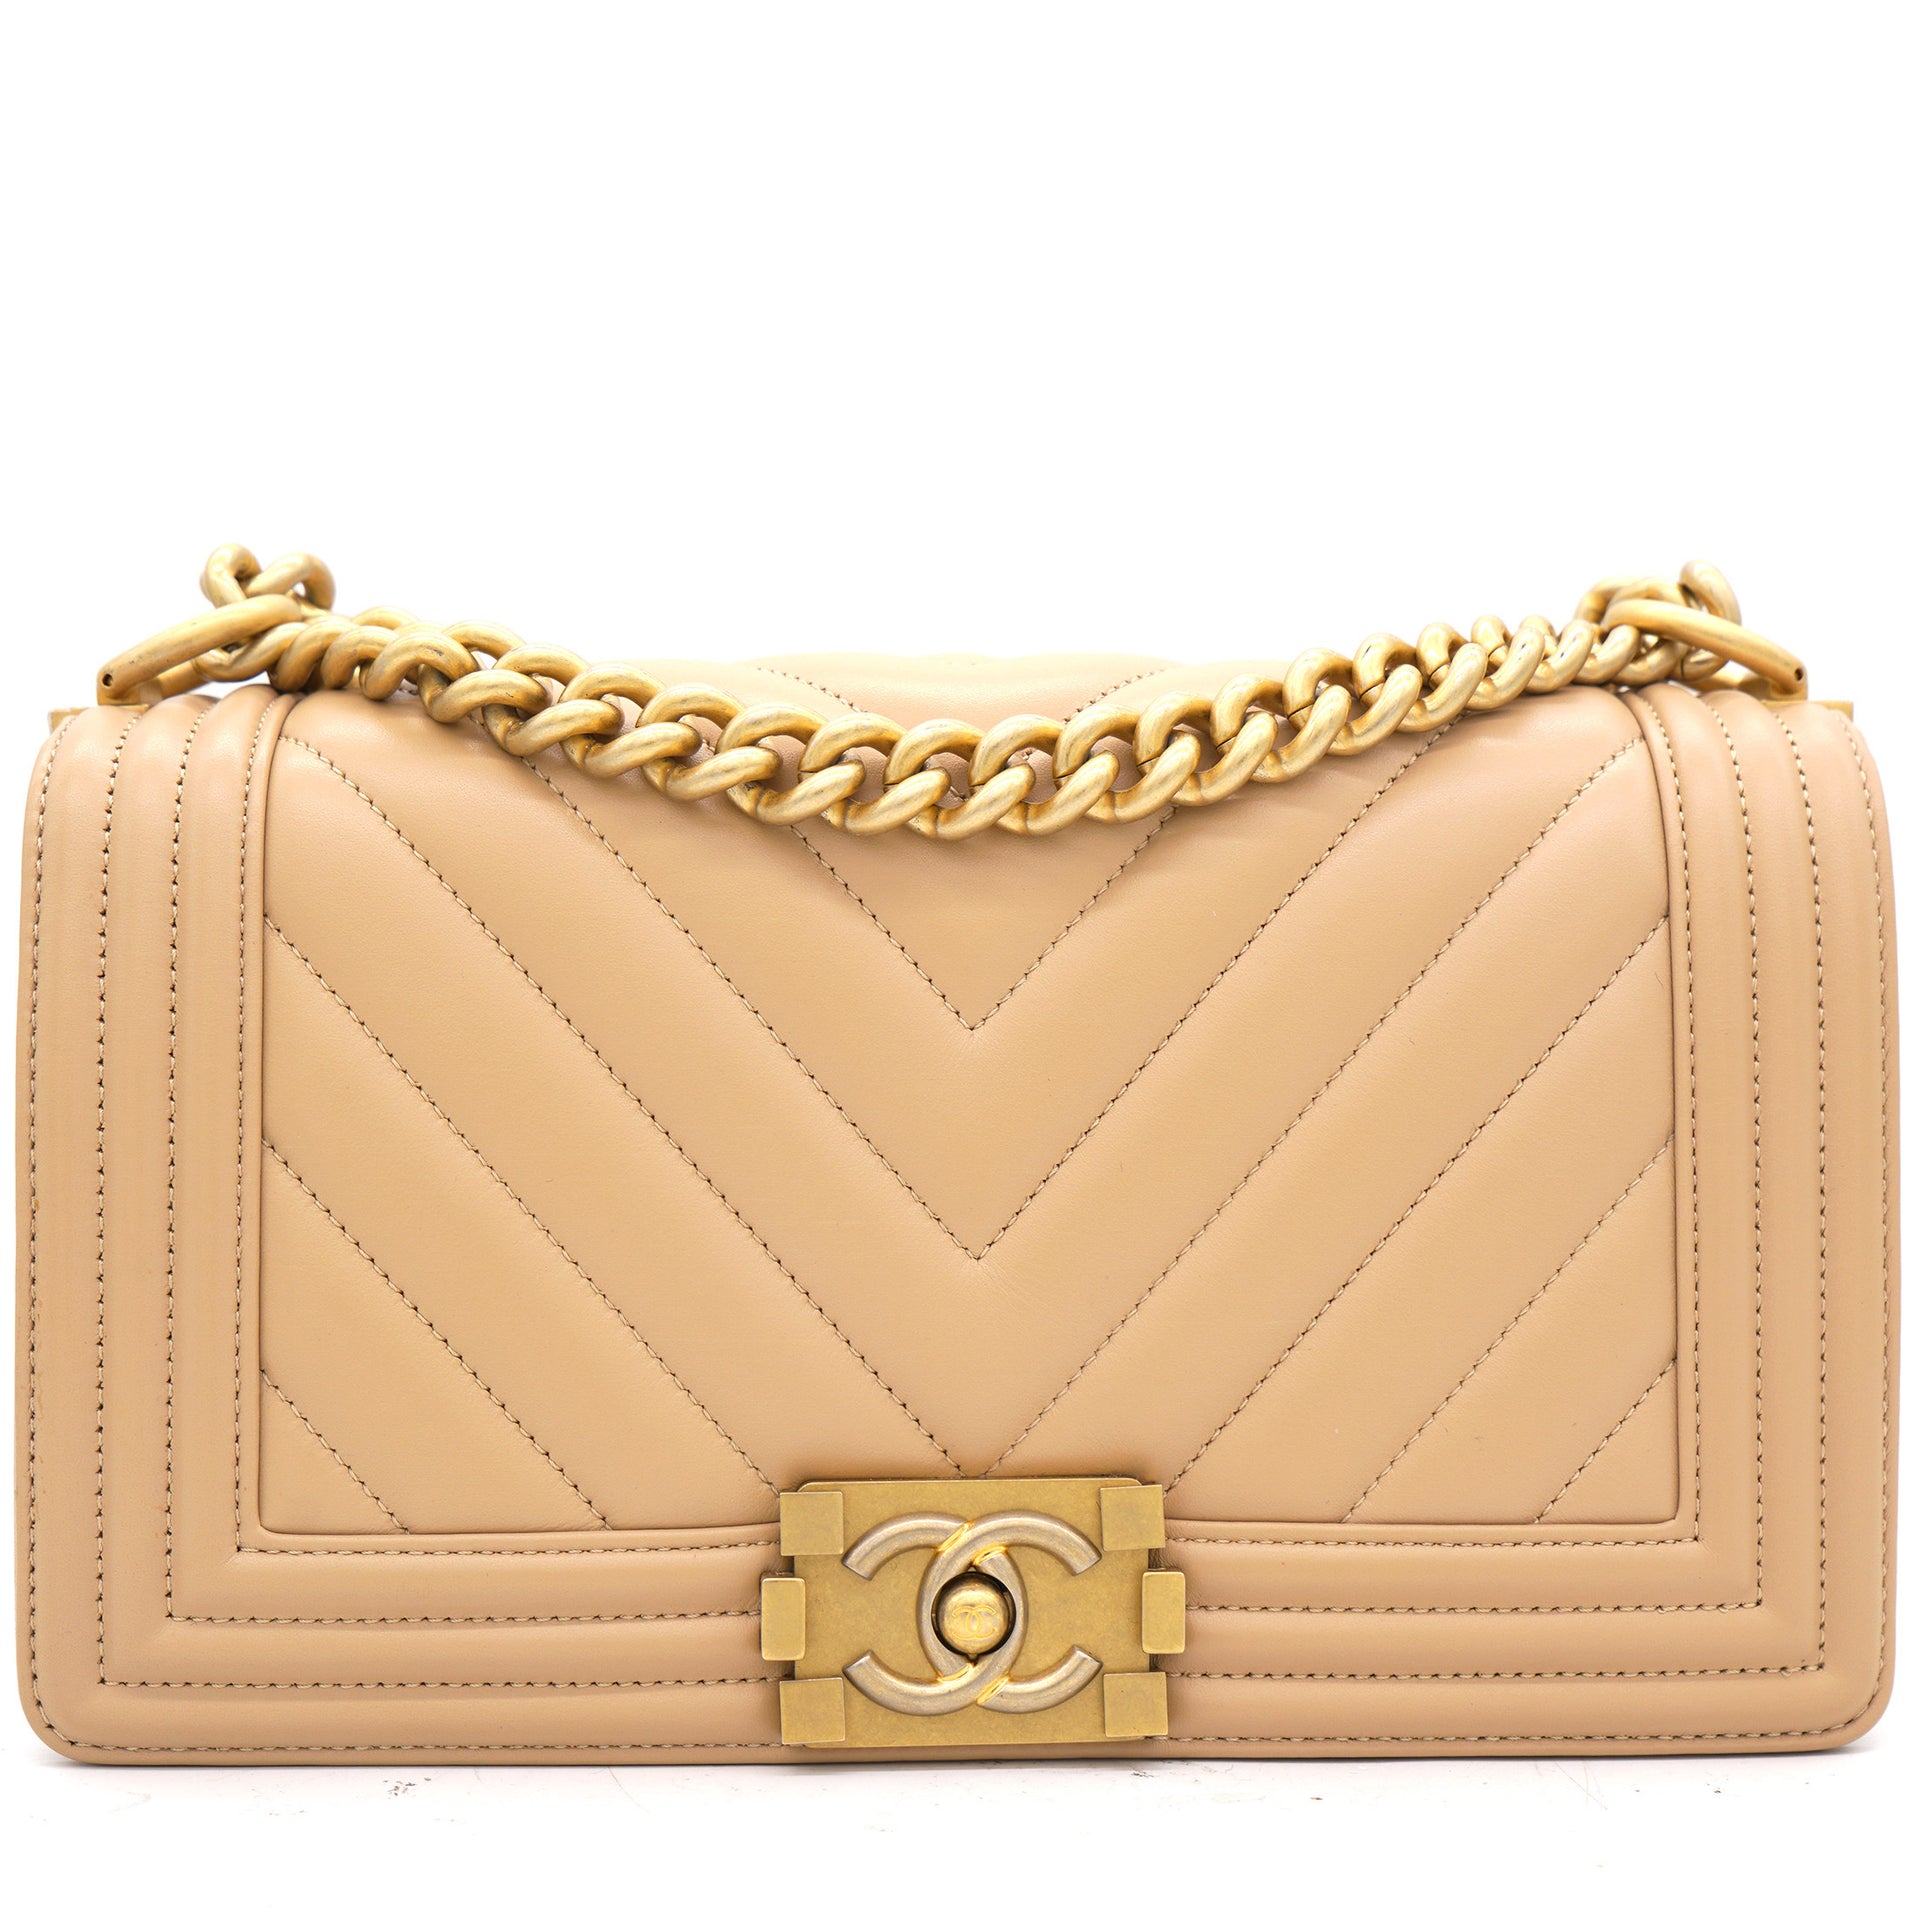 Chanel Quilted Boy Wallet on Chain WOC Red Caviar Aged Gold Hardware – Coco  Approved Studio